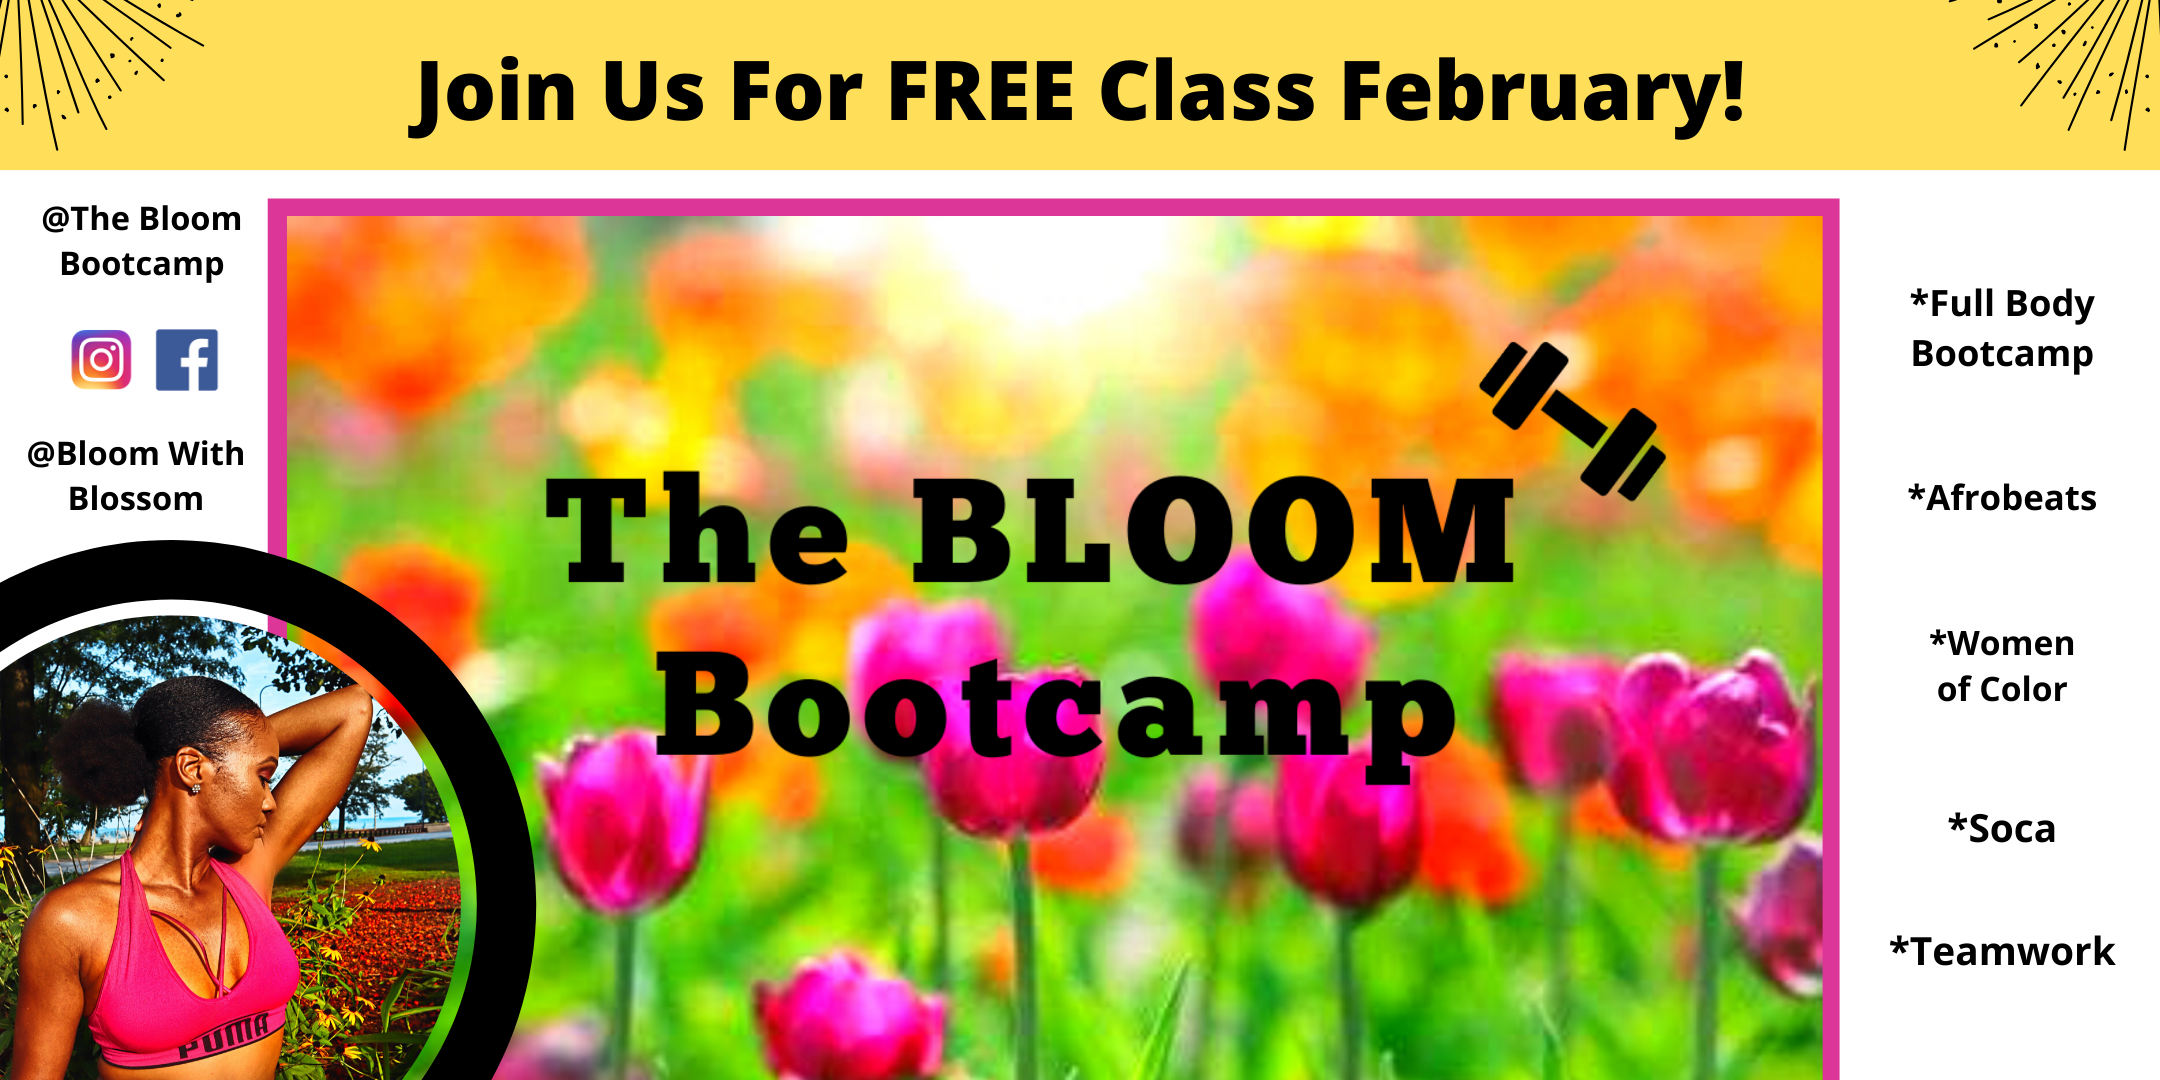 FREE Class February - Bootcamp Classes